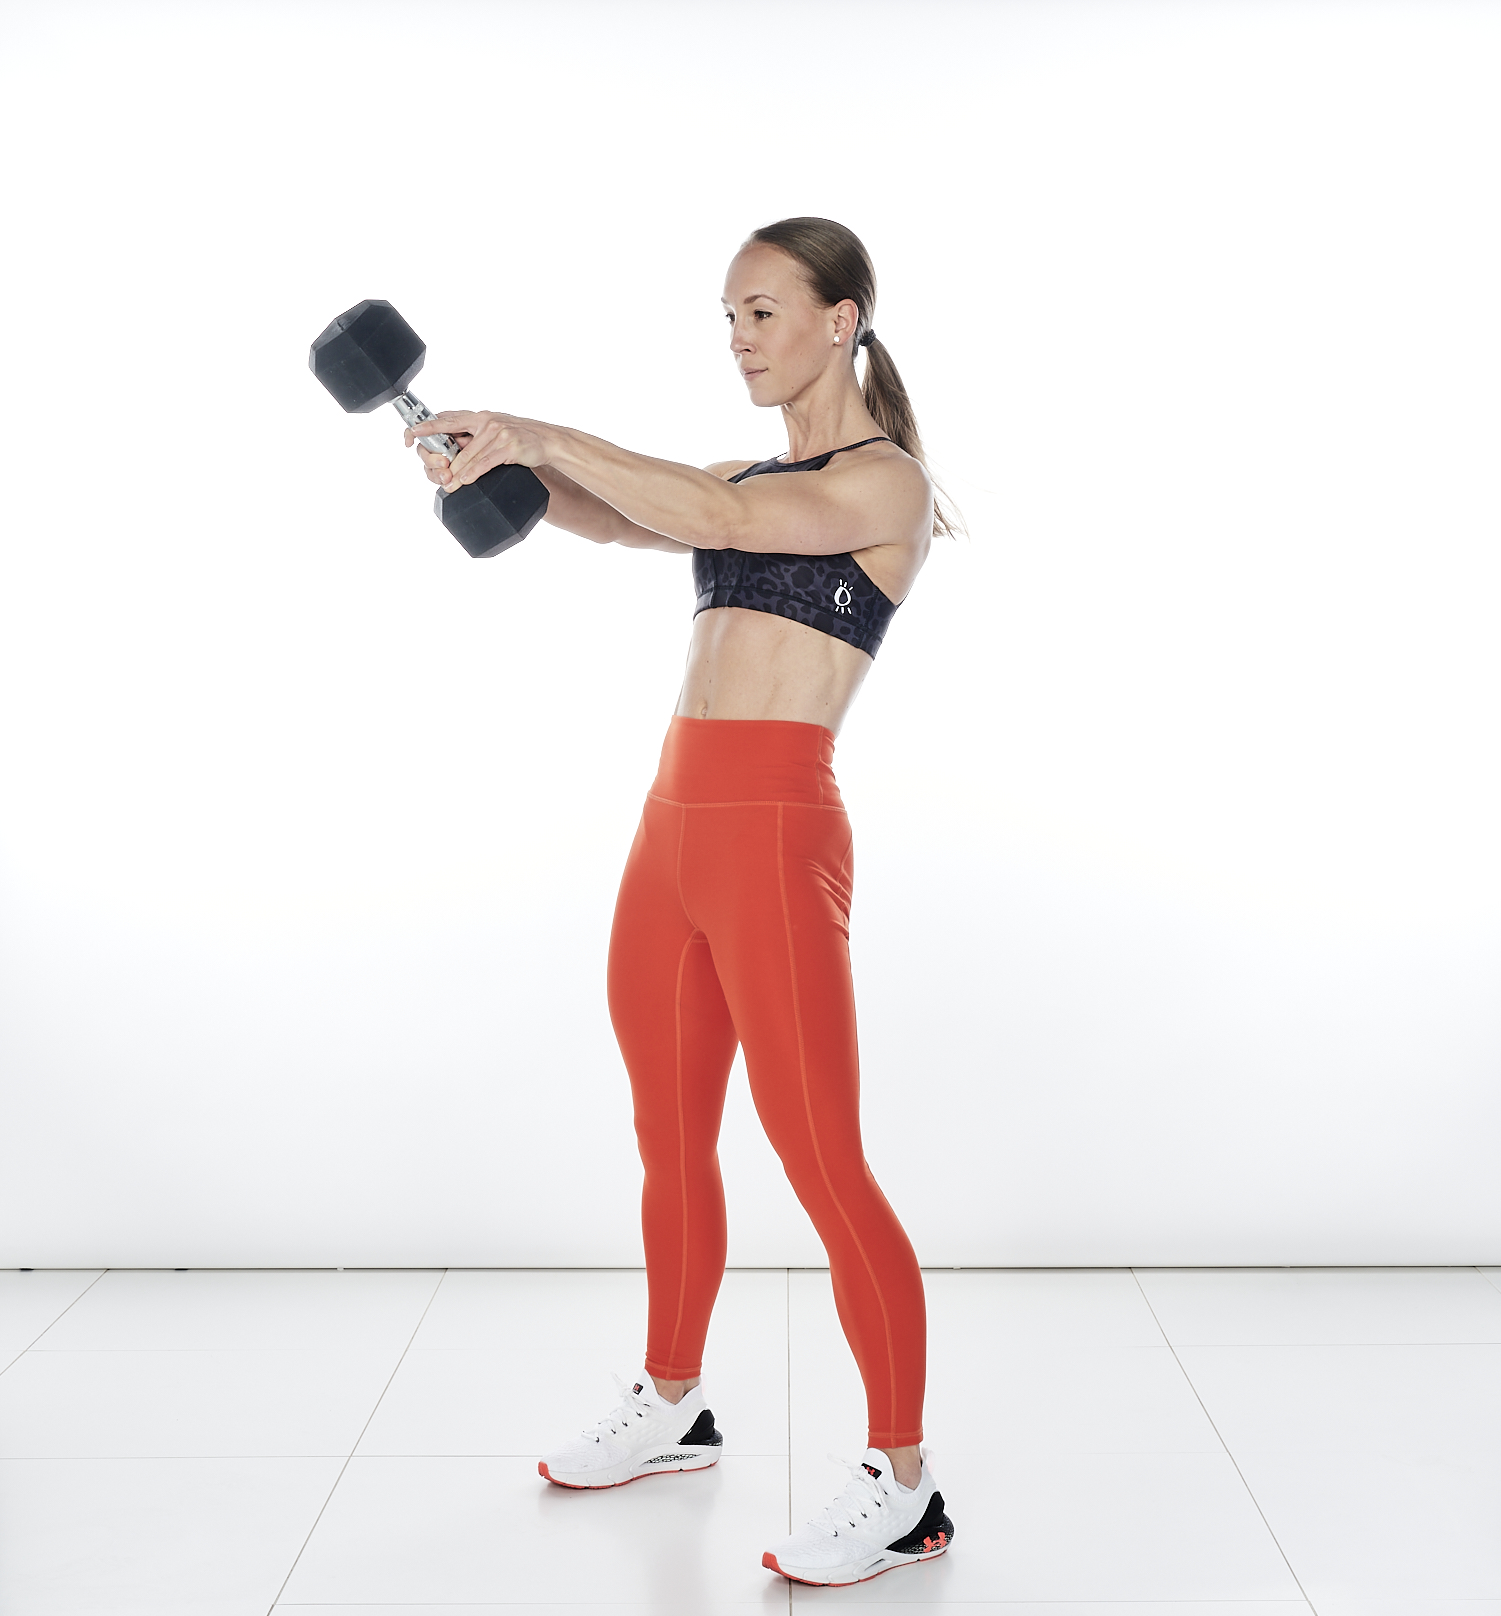 30 minute dumbbell workout for women